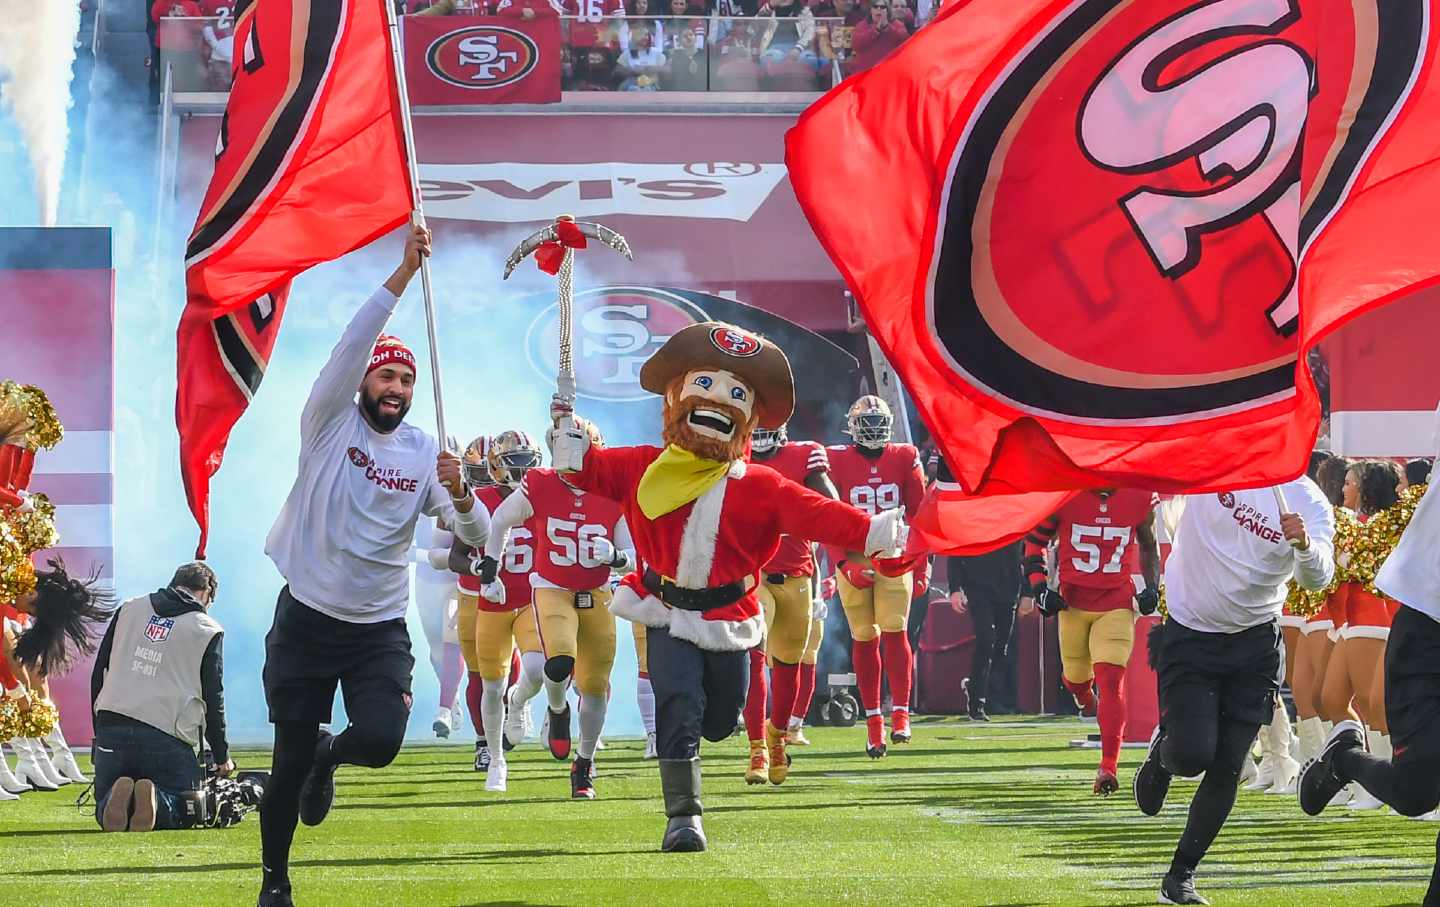 The San Francisco 49ers mascot, Sourdough Sam, leads the team onto the field at the start of the game between the Washington Commanders and the San Francisco 49ers on Saturday, December 24, 2022, in Santa Clara, Calif.